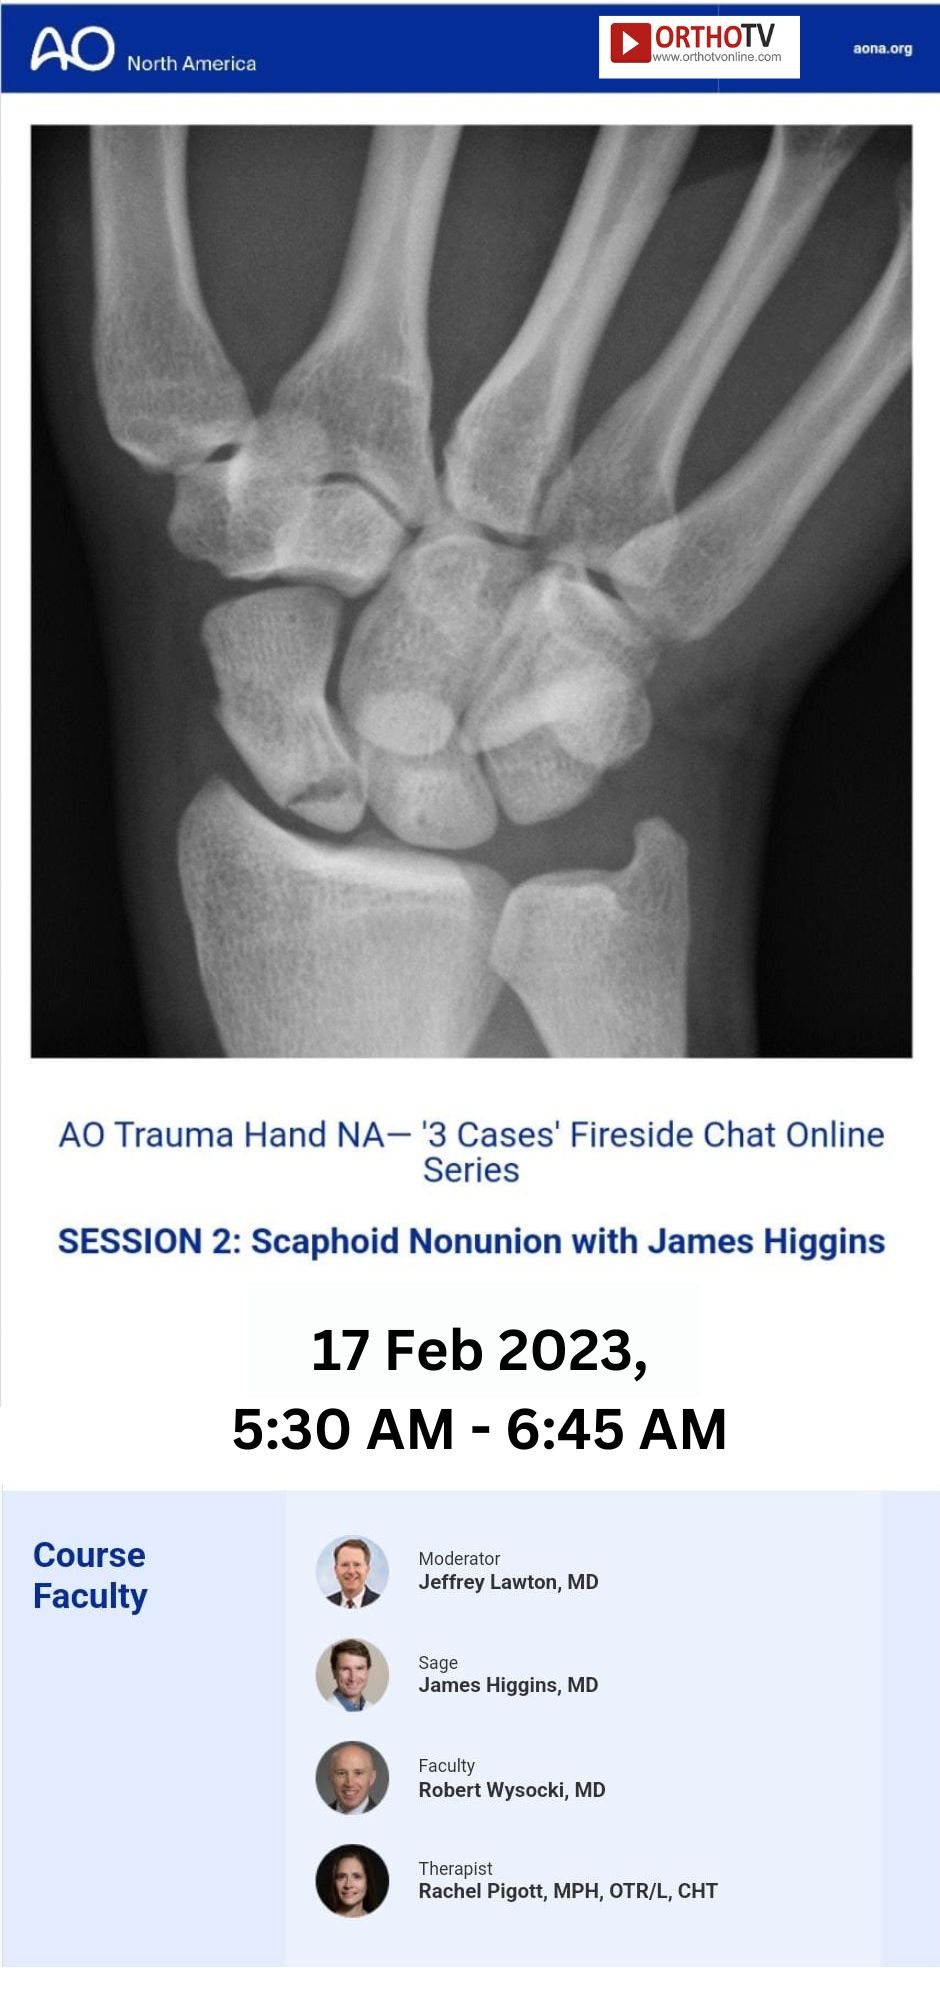 AO TRAUMA HAND NORTH AMERICA Webinar on OrthoTV Global - 3 Cases Fireside Chat Online Series - Session 2 : Scaphoid Nonunion with James Higgins